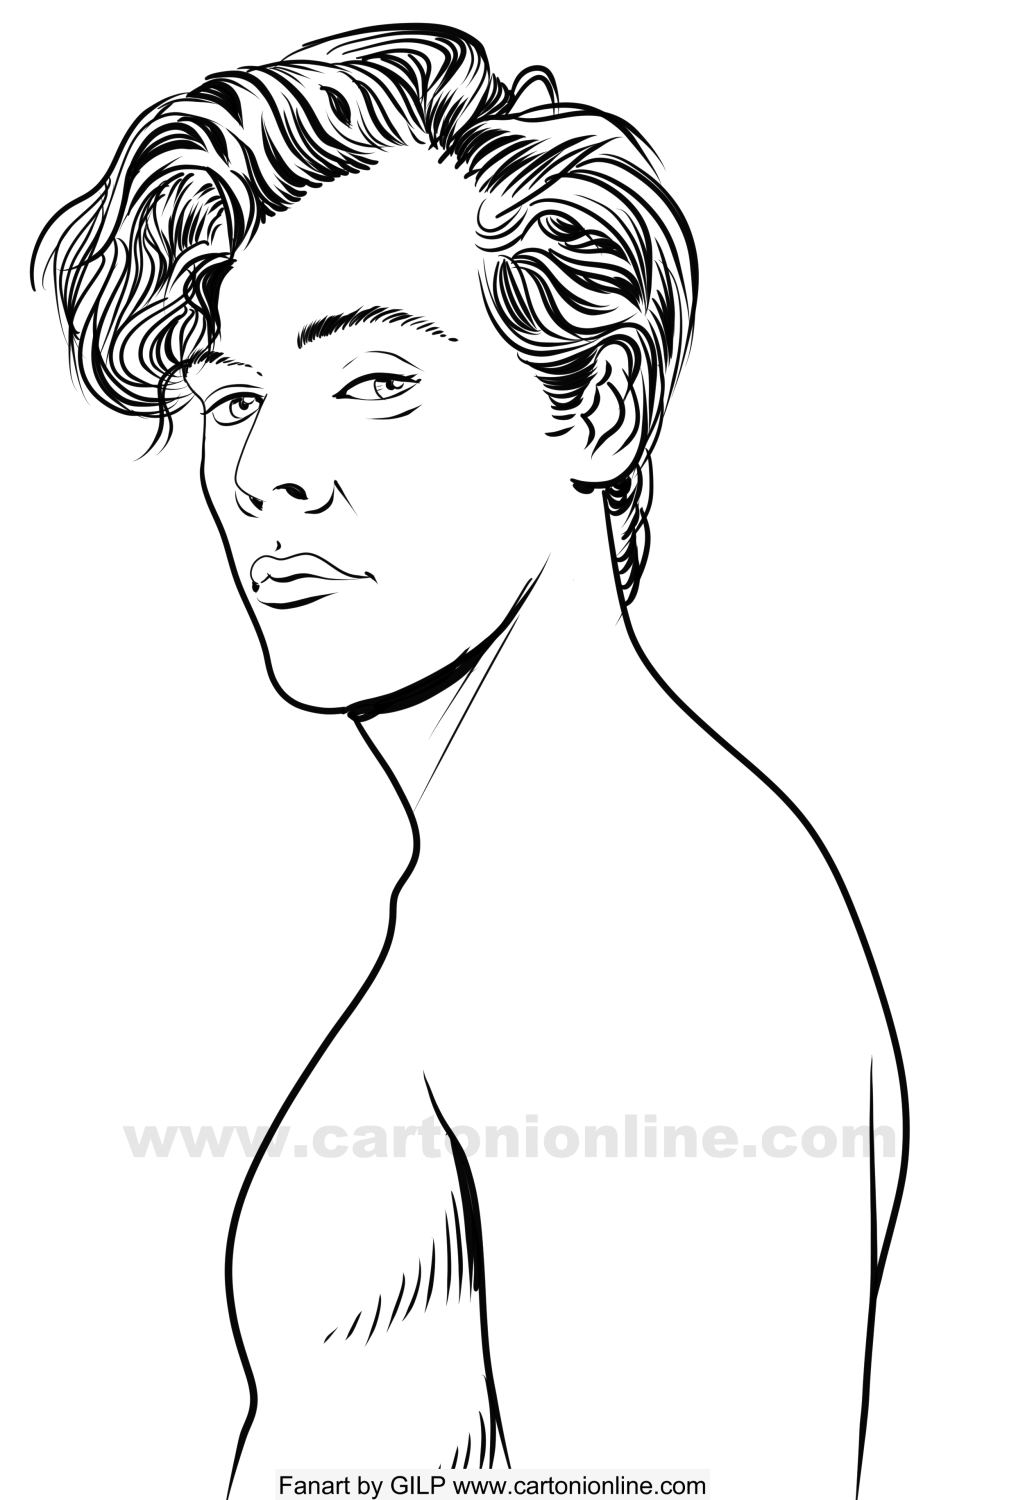 Harry Styles 06 from One Direction coloring pages to print and coloring